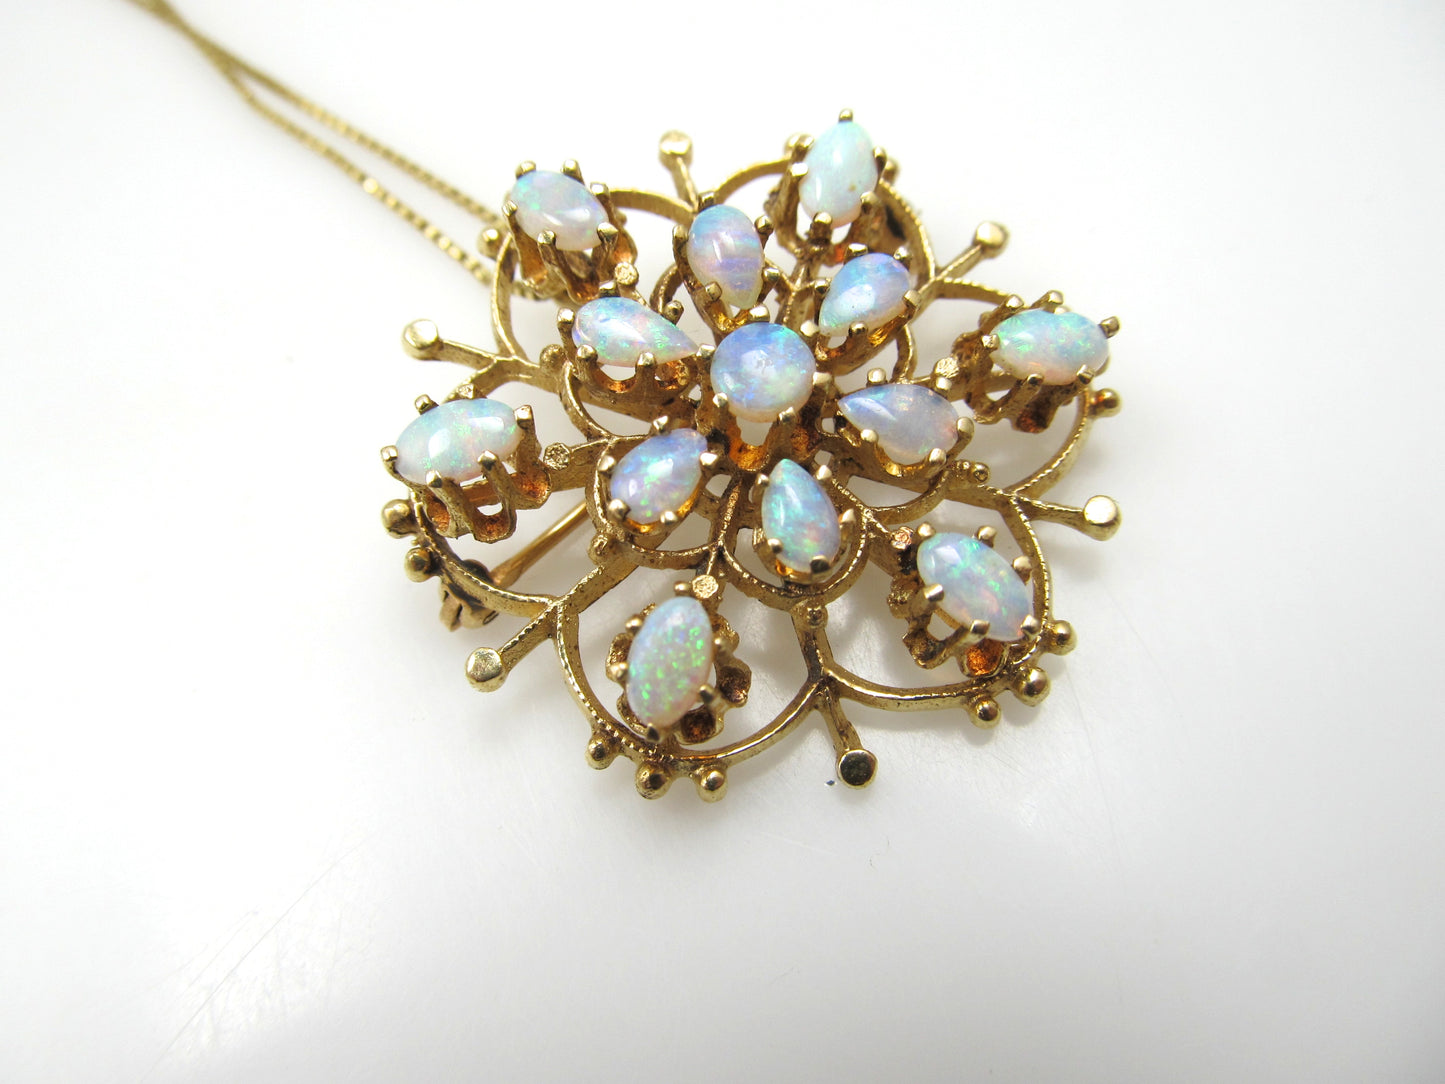 Vintage 14k yellow gold necklace with opals